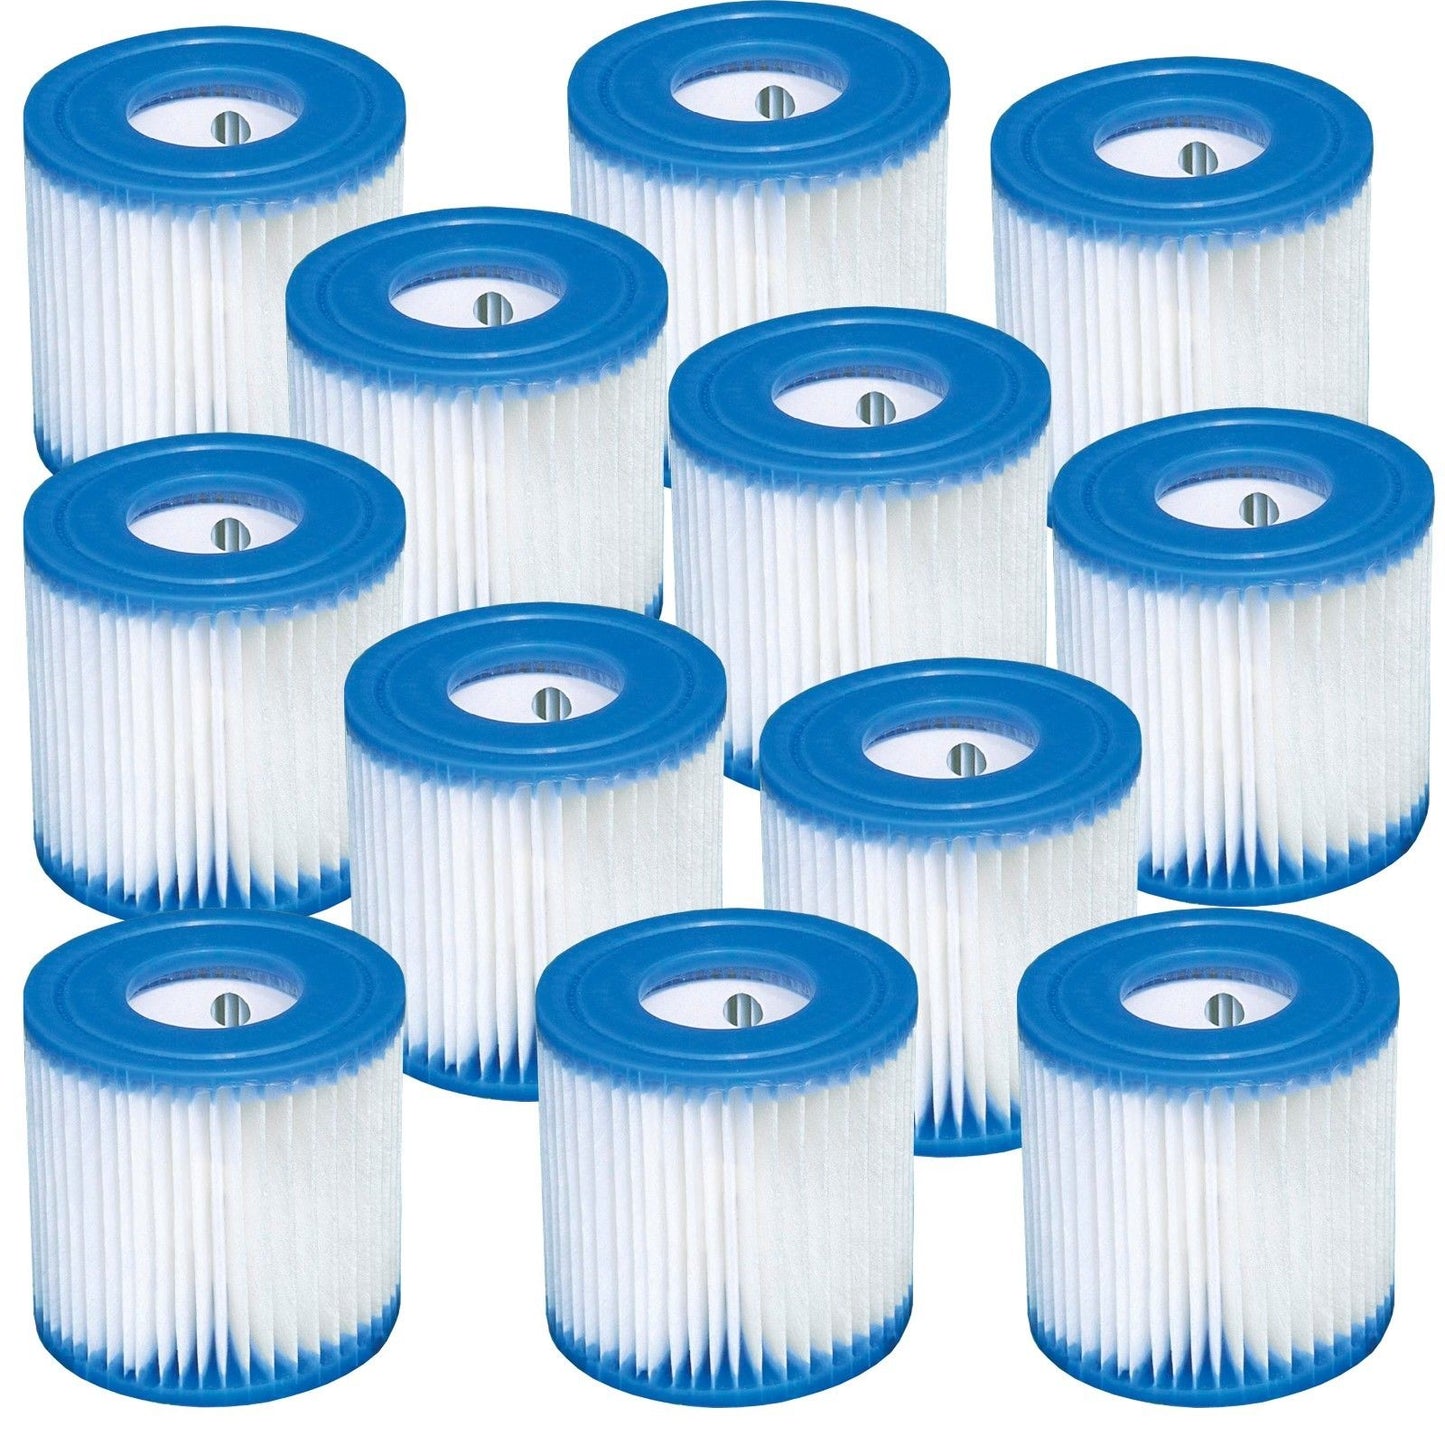 Intex Type H Filter Cartridge for Above Ground Swimming Pool Pumps 12 Pack